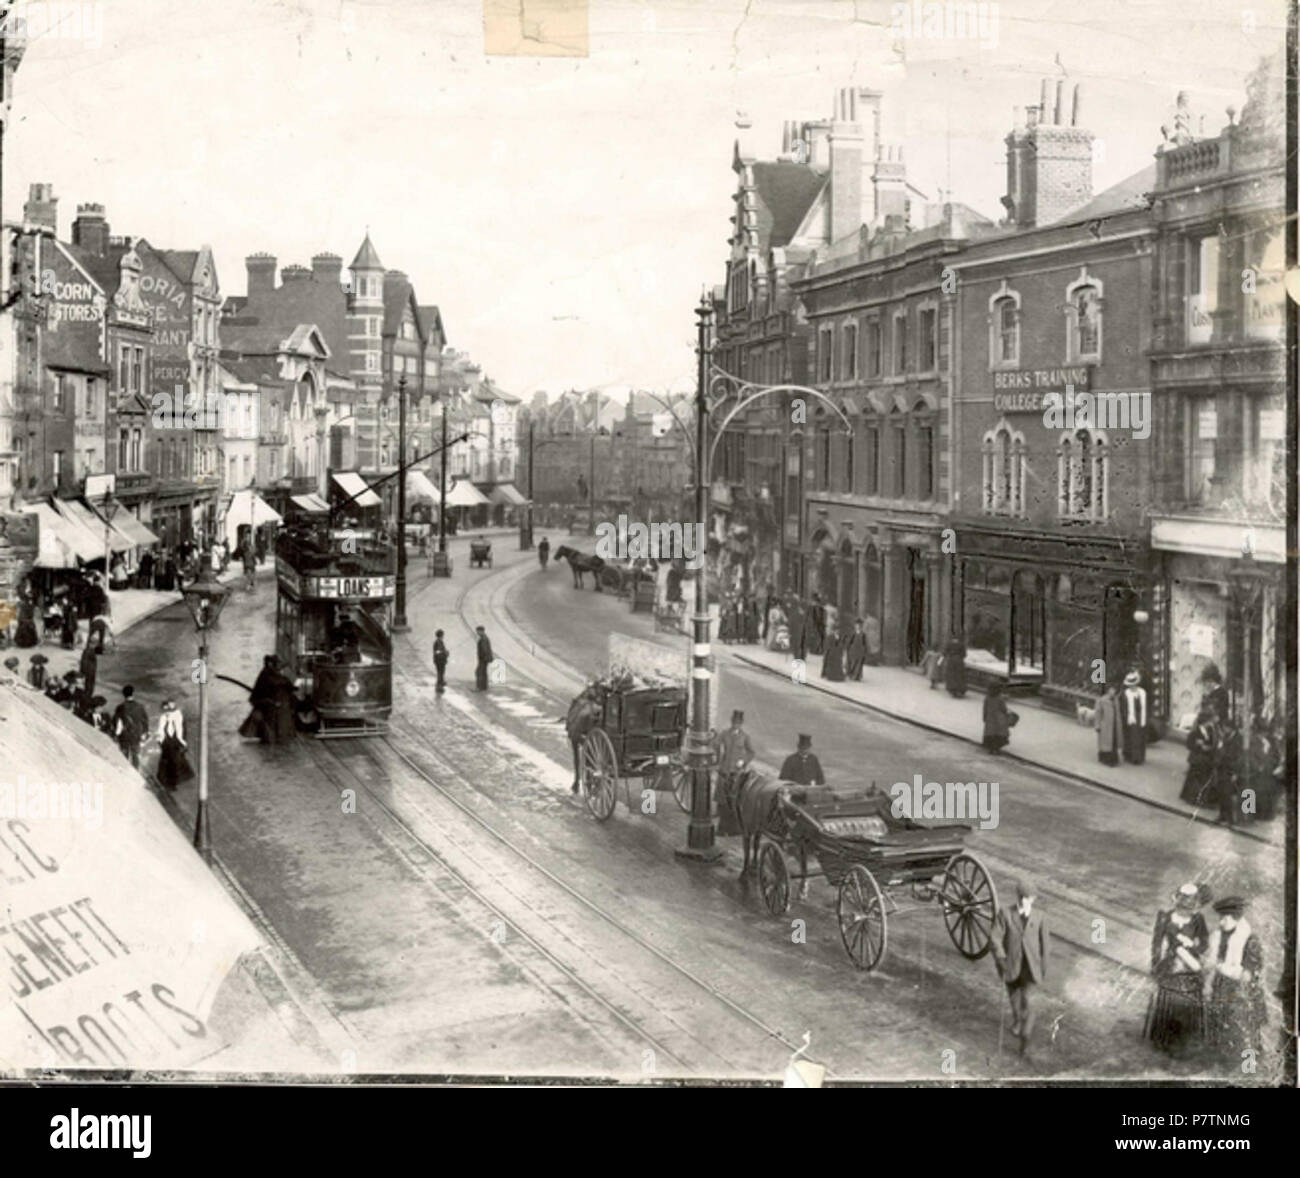 English: Broad Street, Reading, looking eastwards from an upper storey window, c. 1904. A tramcar heads eastwards, and two horse-drawn cabs wait in the middle of the road, by the trolley-pole. North side: No. 17 (W. and R. Fletcher, butchers); No. 14 (Royal Oak Inn); No. 6 (United Counties Bank). South side: Nos. 116 and 117 (Fergusons Ltd., Angel Brewery and Wine and Spirit Stores); Nos. 114 and 115 (Berkshire Training College of Music on the upper floors). 1900-1909. 1904 55 Broad Street, Reading, looking eastwards, c. 1904 Stock Photo